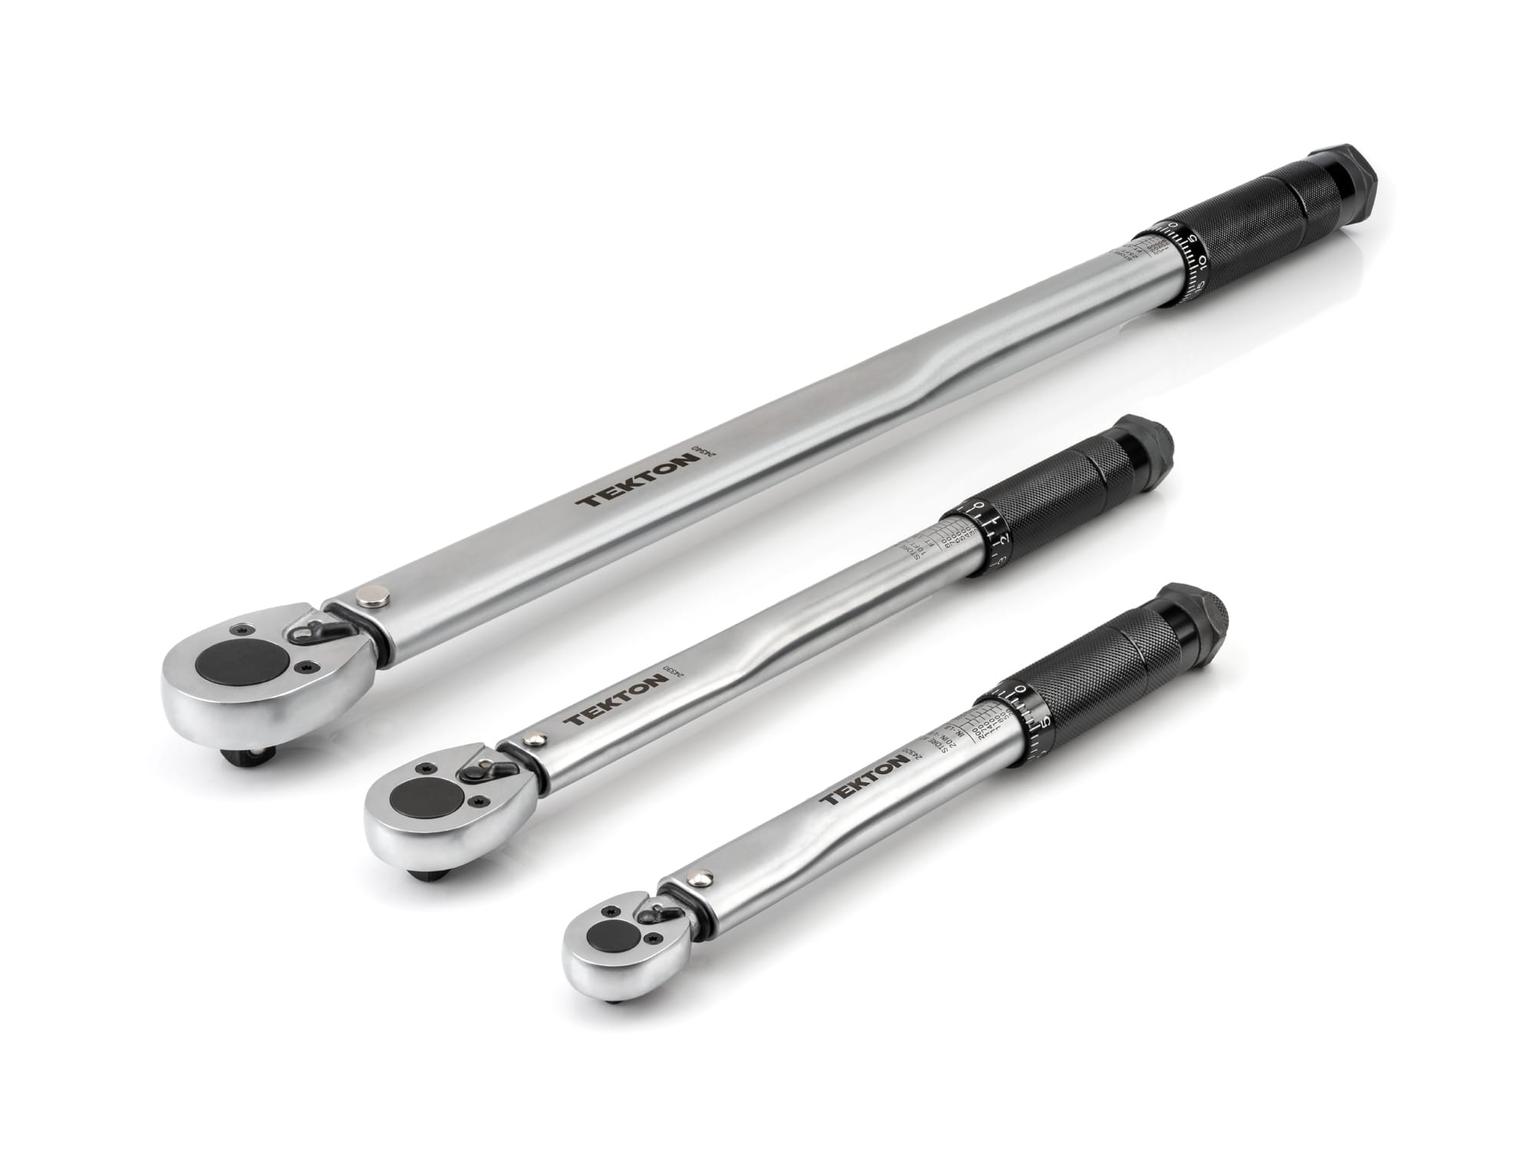 1/4, 3/8, 1/2 Inch Drive Micrometer Torque Wrench Set (3-Piece)